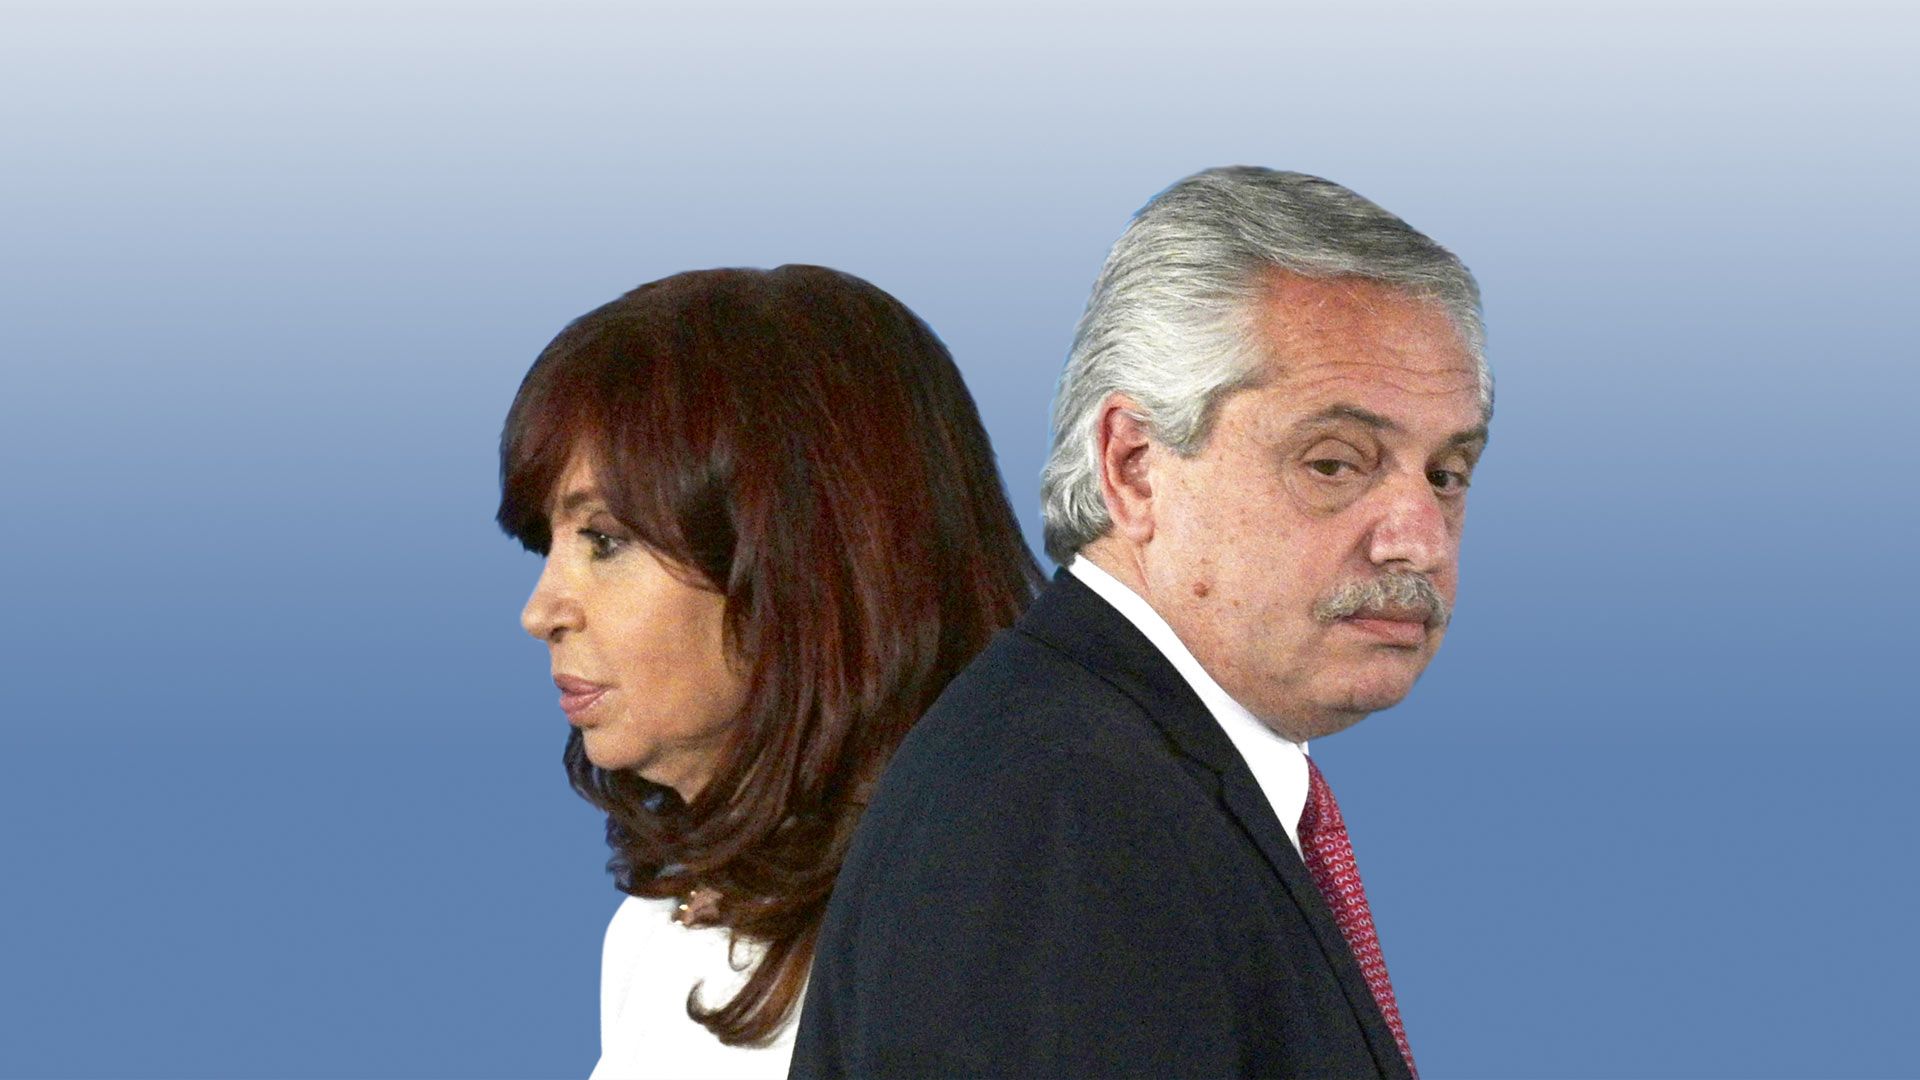 Argentines have gradually lost faith in the president, Alberto Fernández, and his vice-president, Cristina Kirchner.